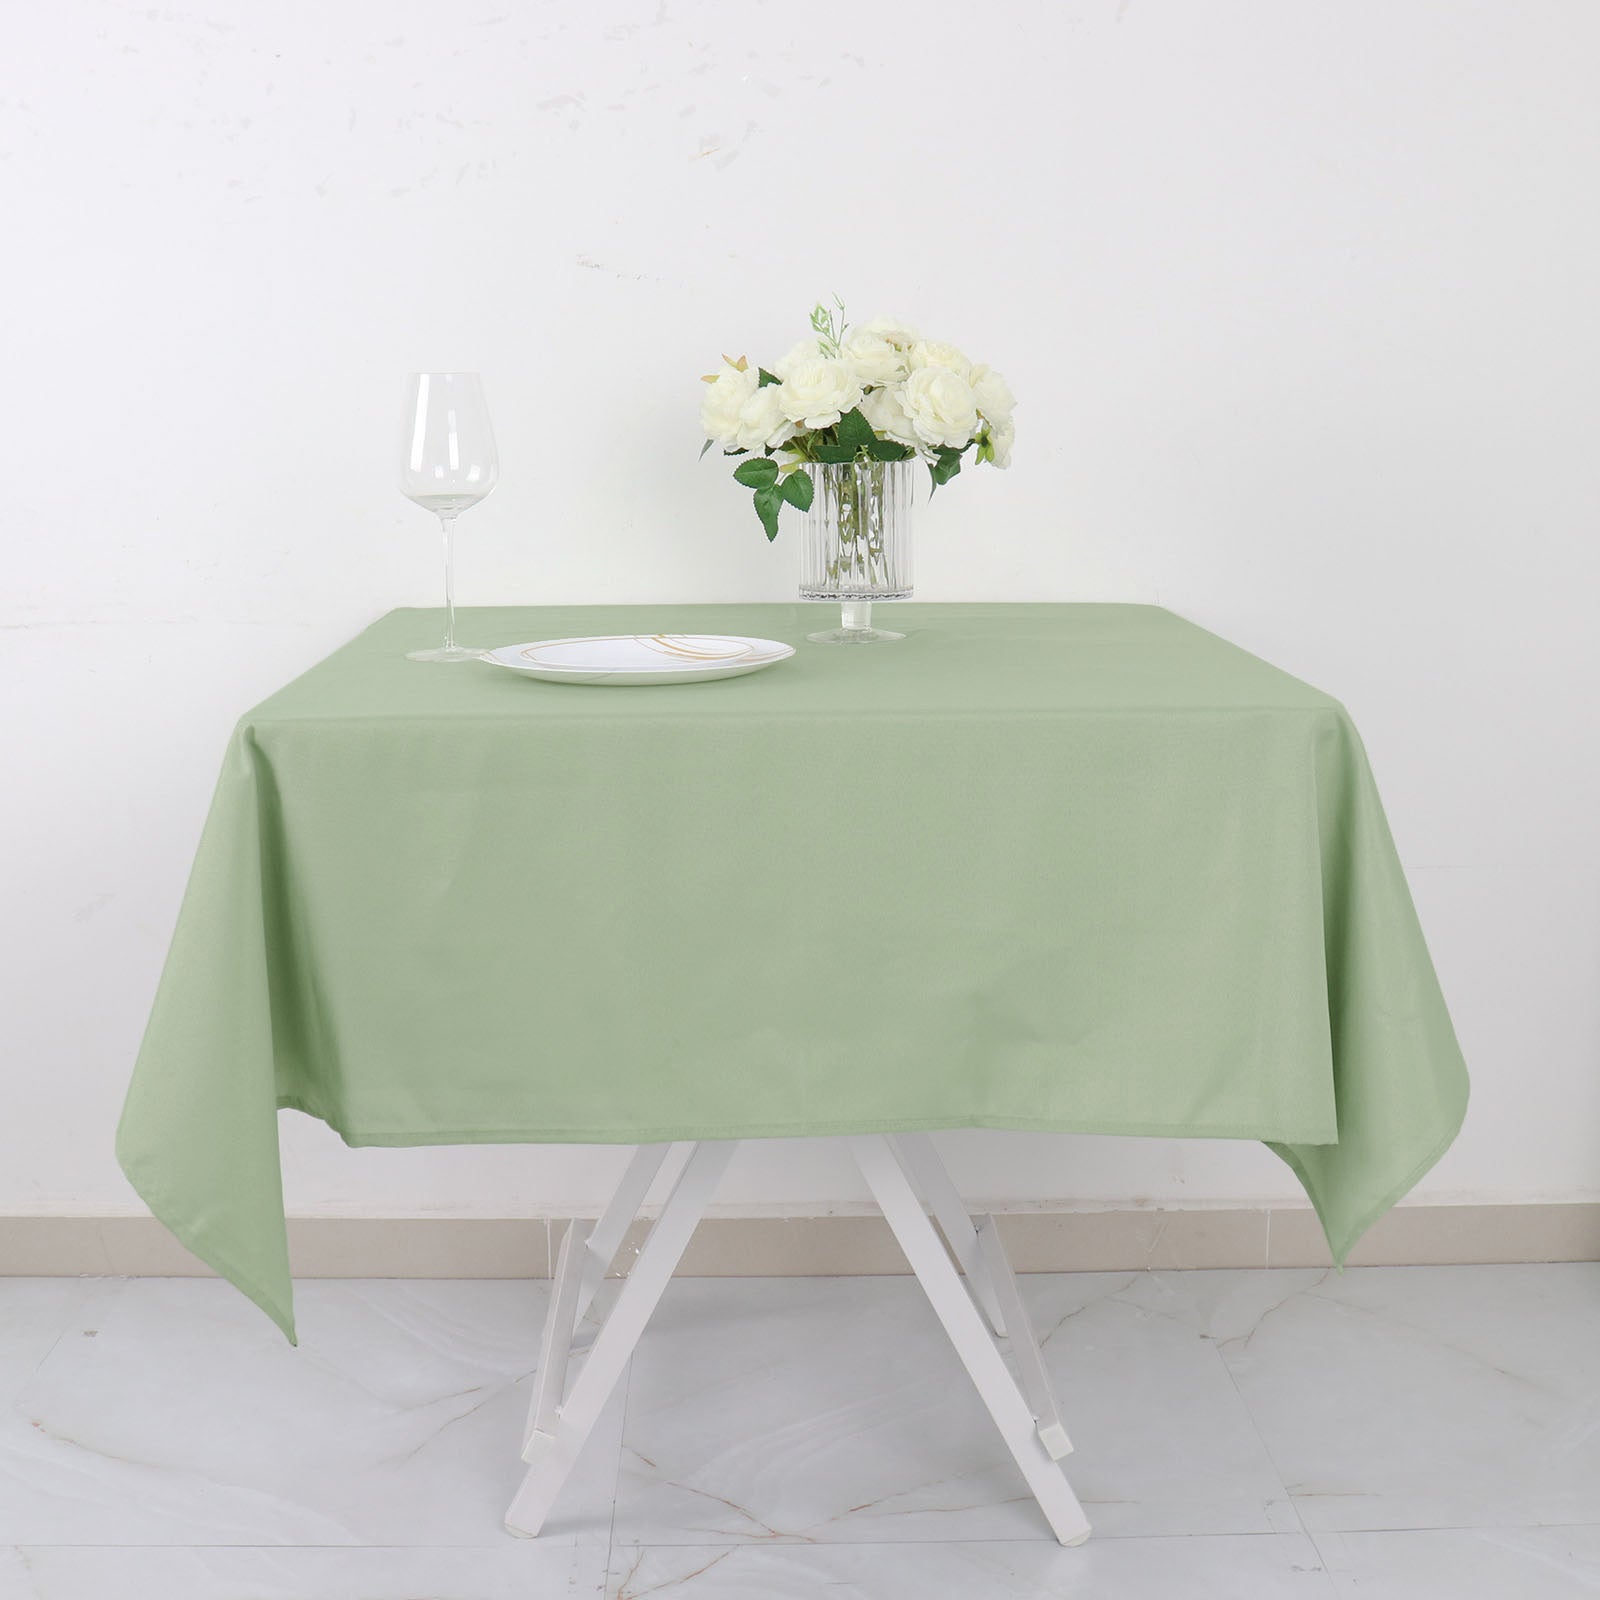 Exquisite 54 Inch. x 100 Ft. Emerald Green Plastic Tablecloth Roll